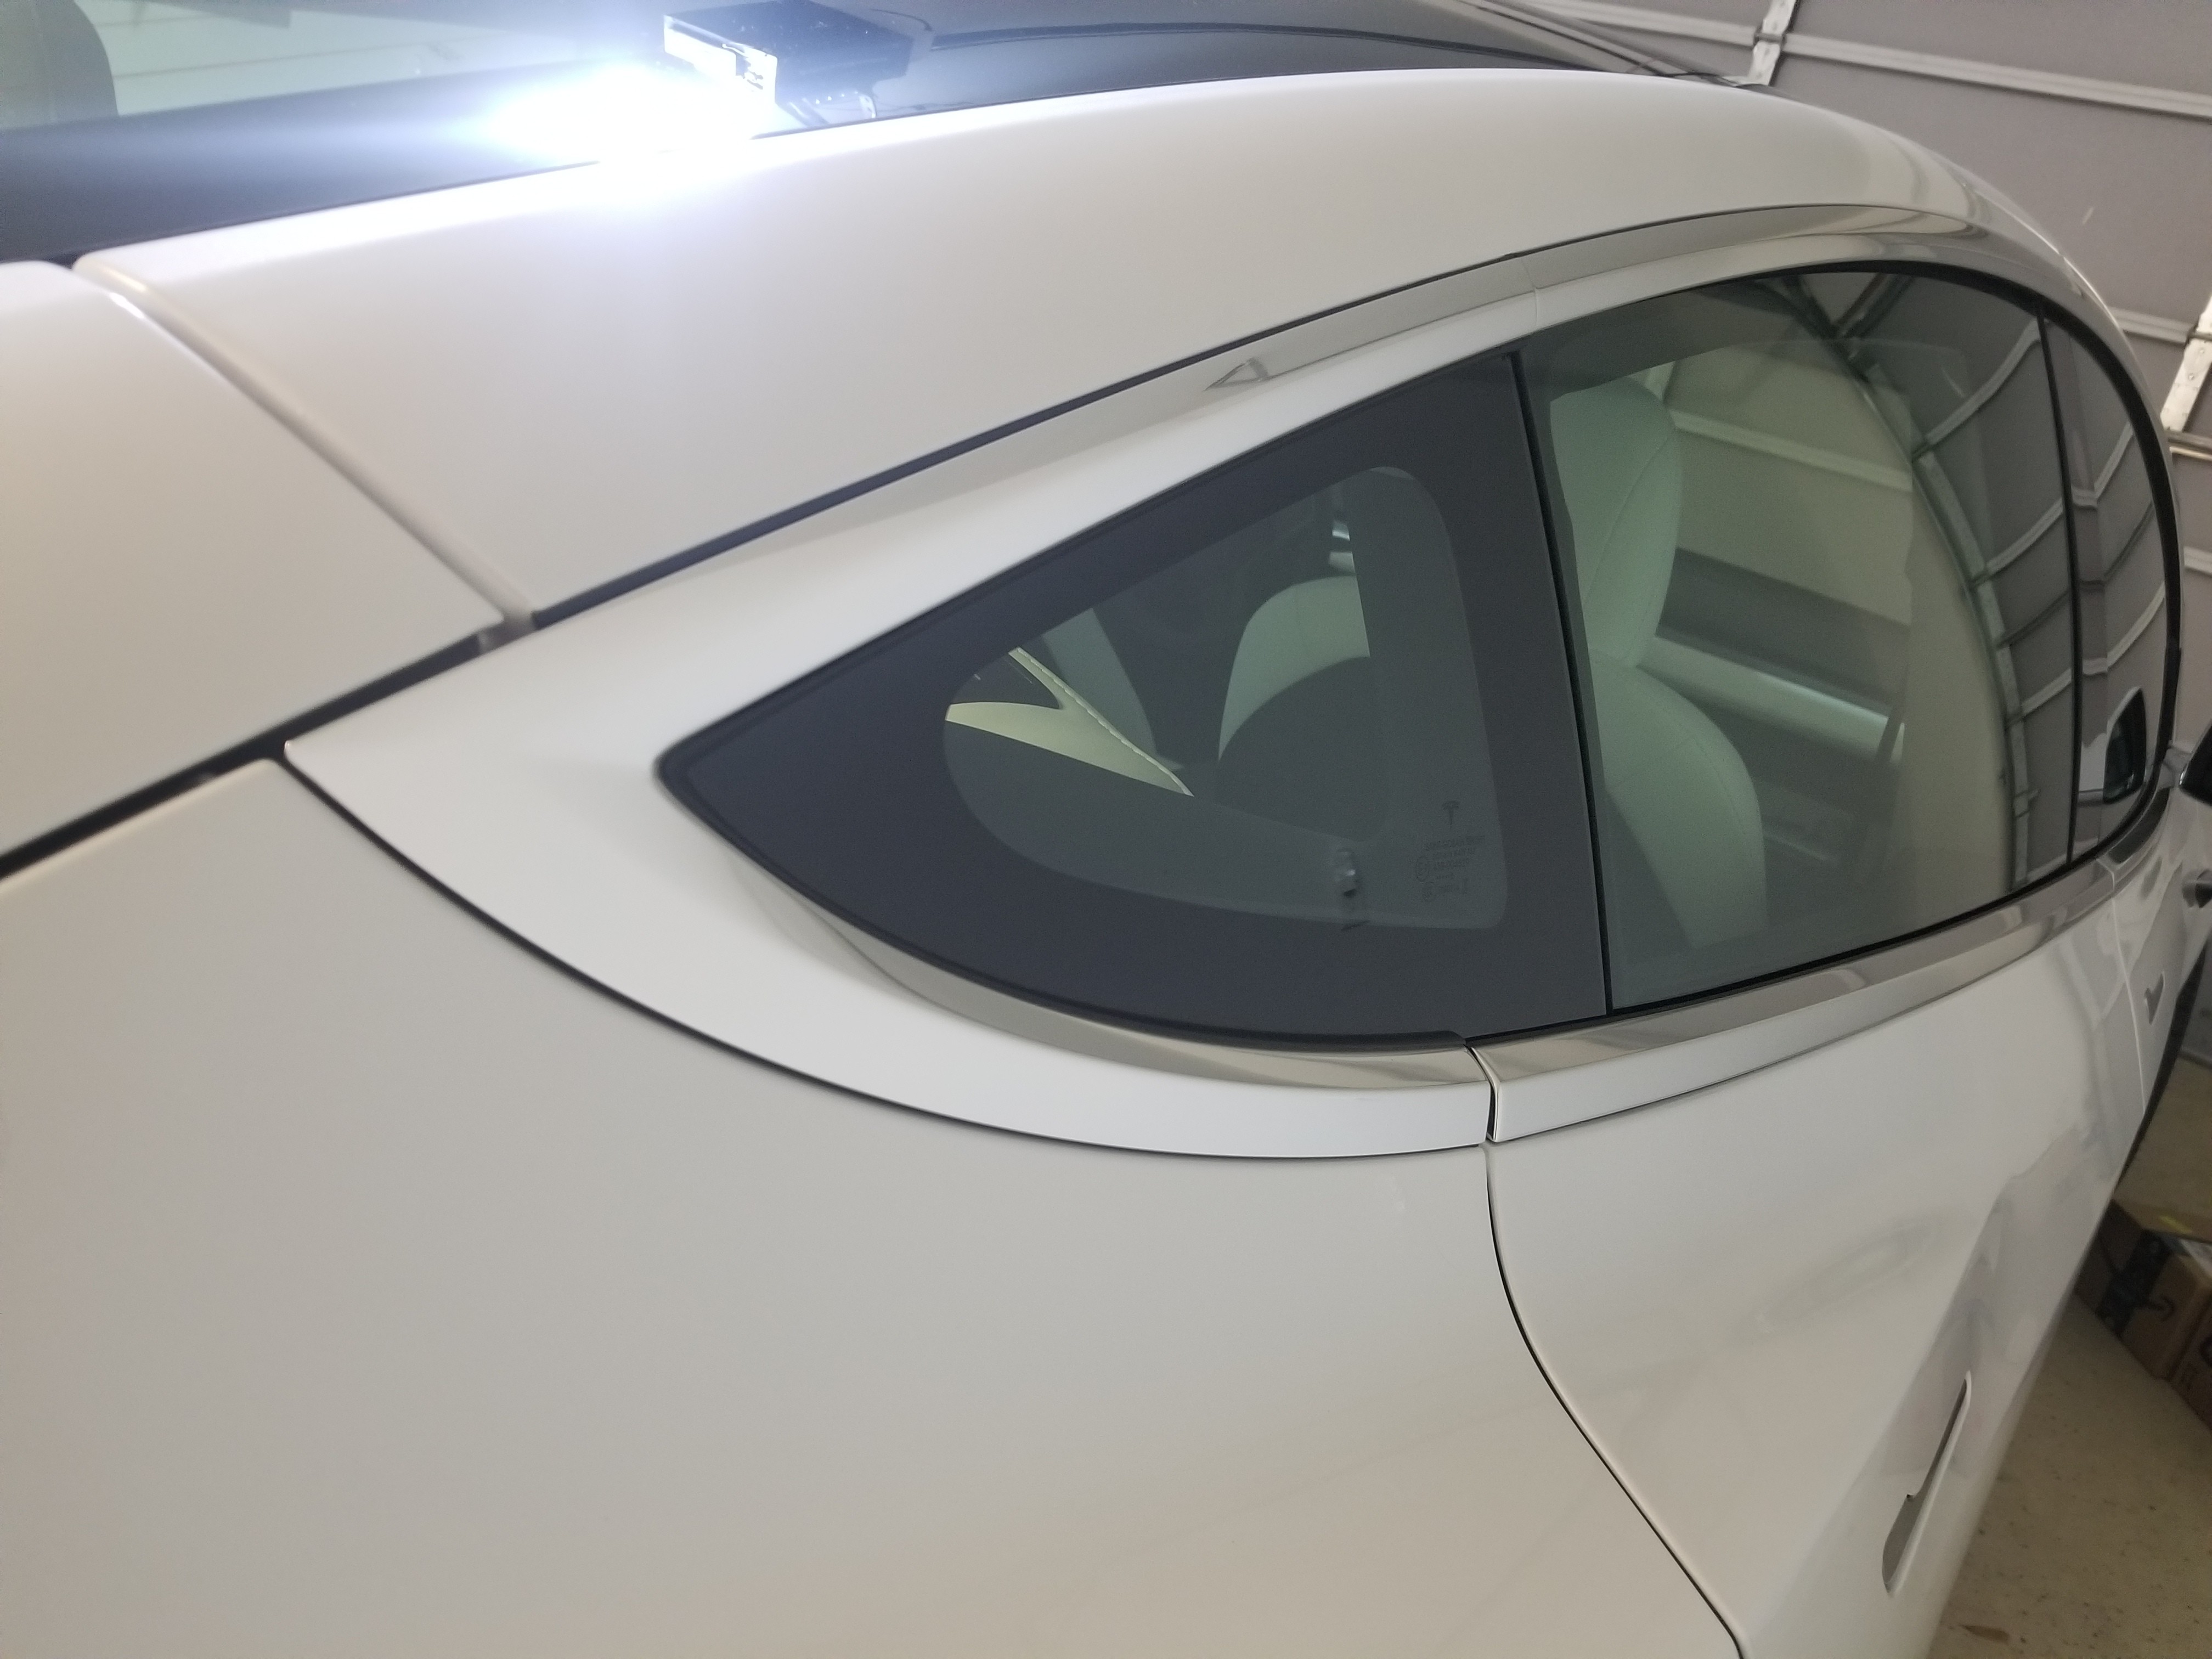 tesla model 3 performance shows bad build quality in extensive photo gallery